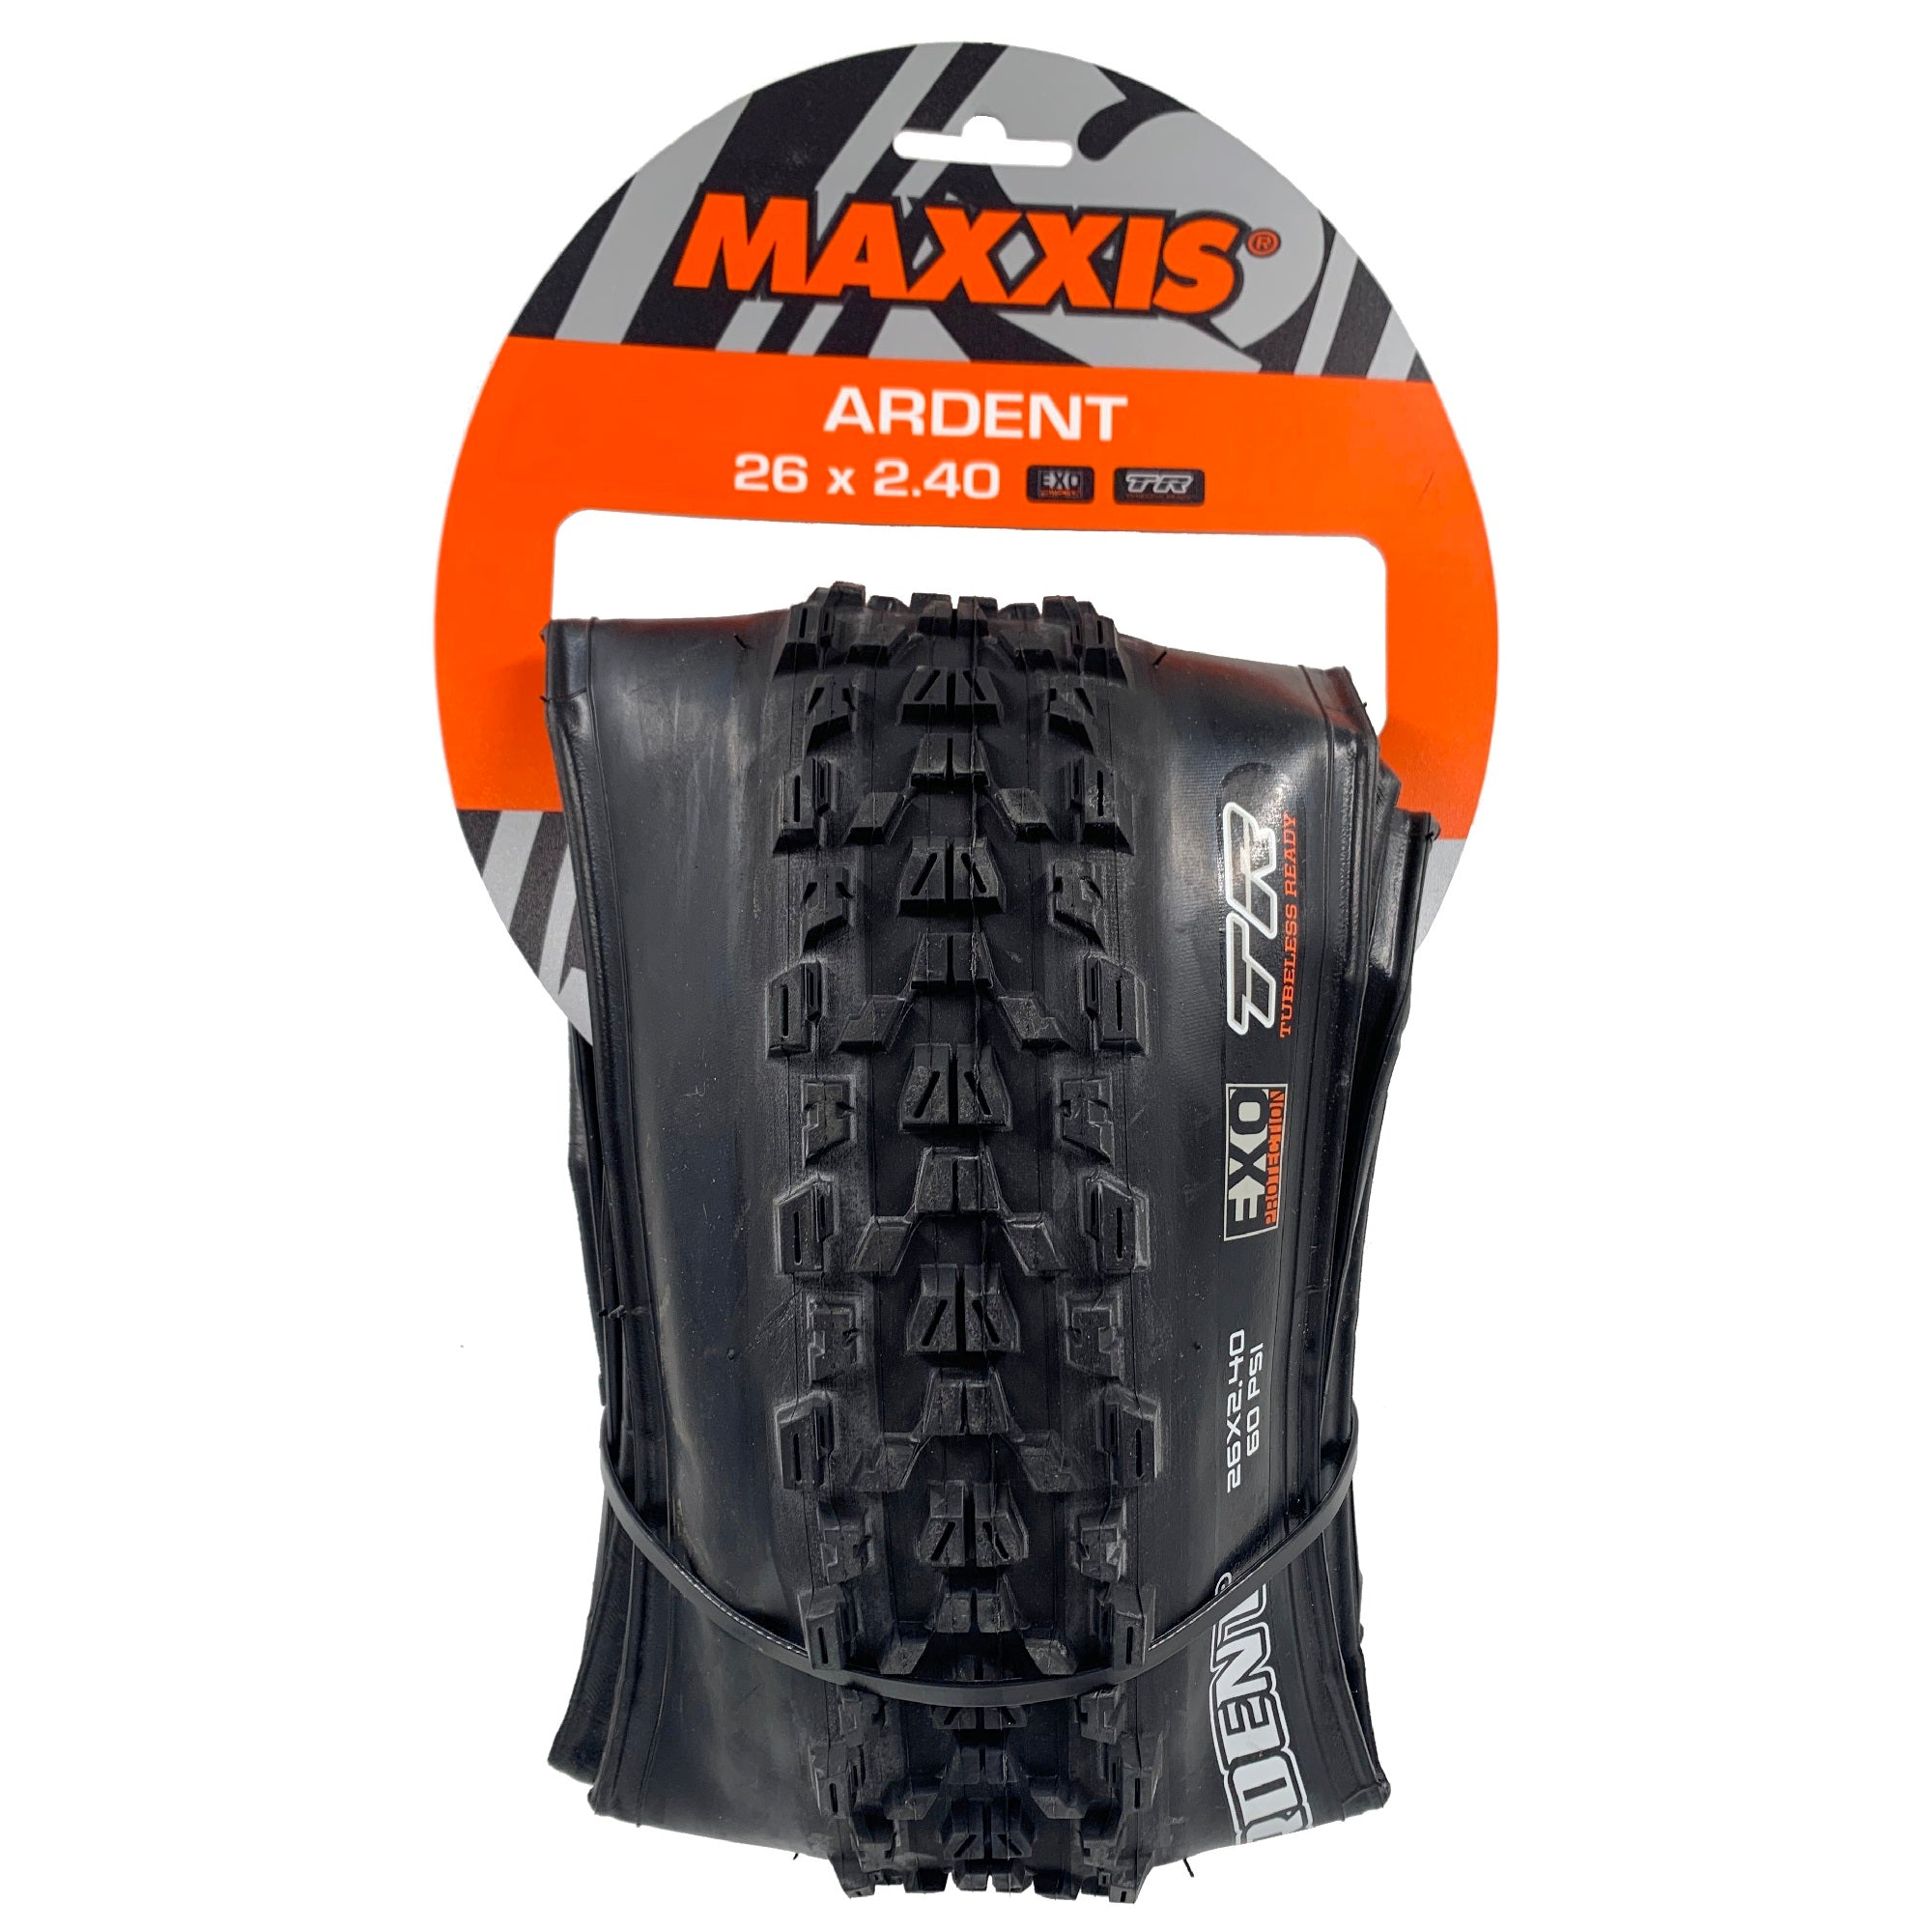 Maxxis Ardent 26-inch EXO Dual Compound Tubeless Ready Folding Tire - The Bikesmiths